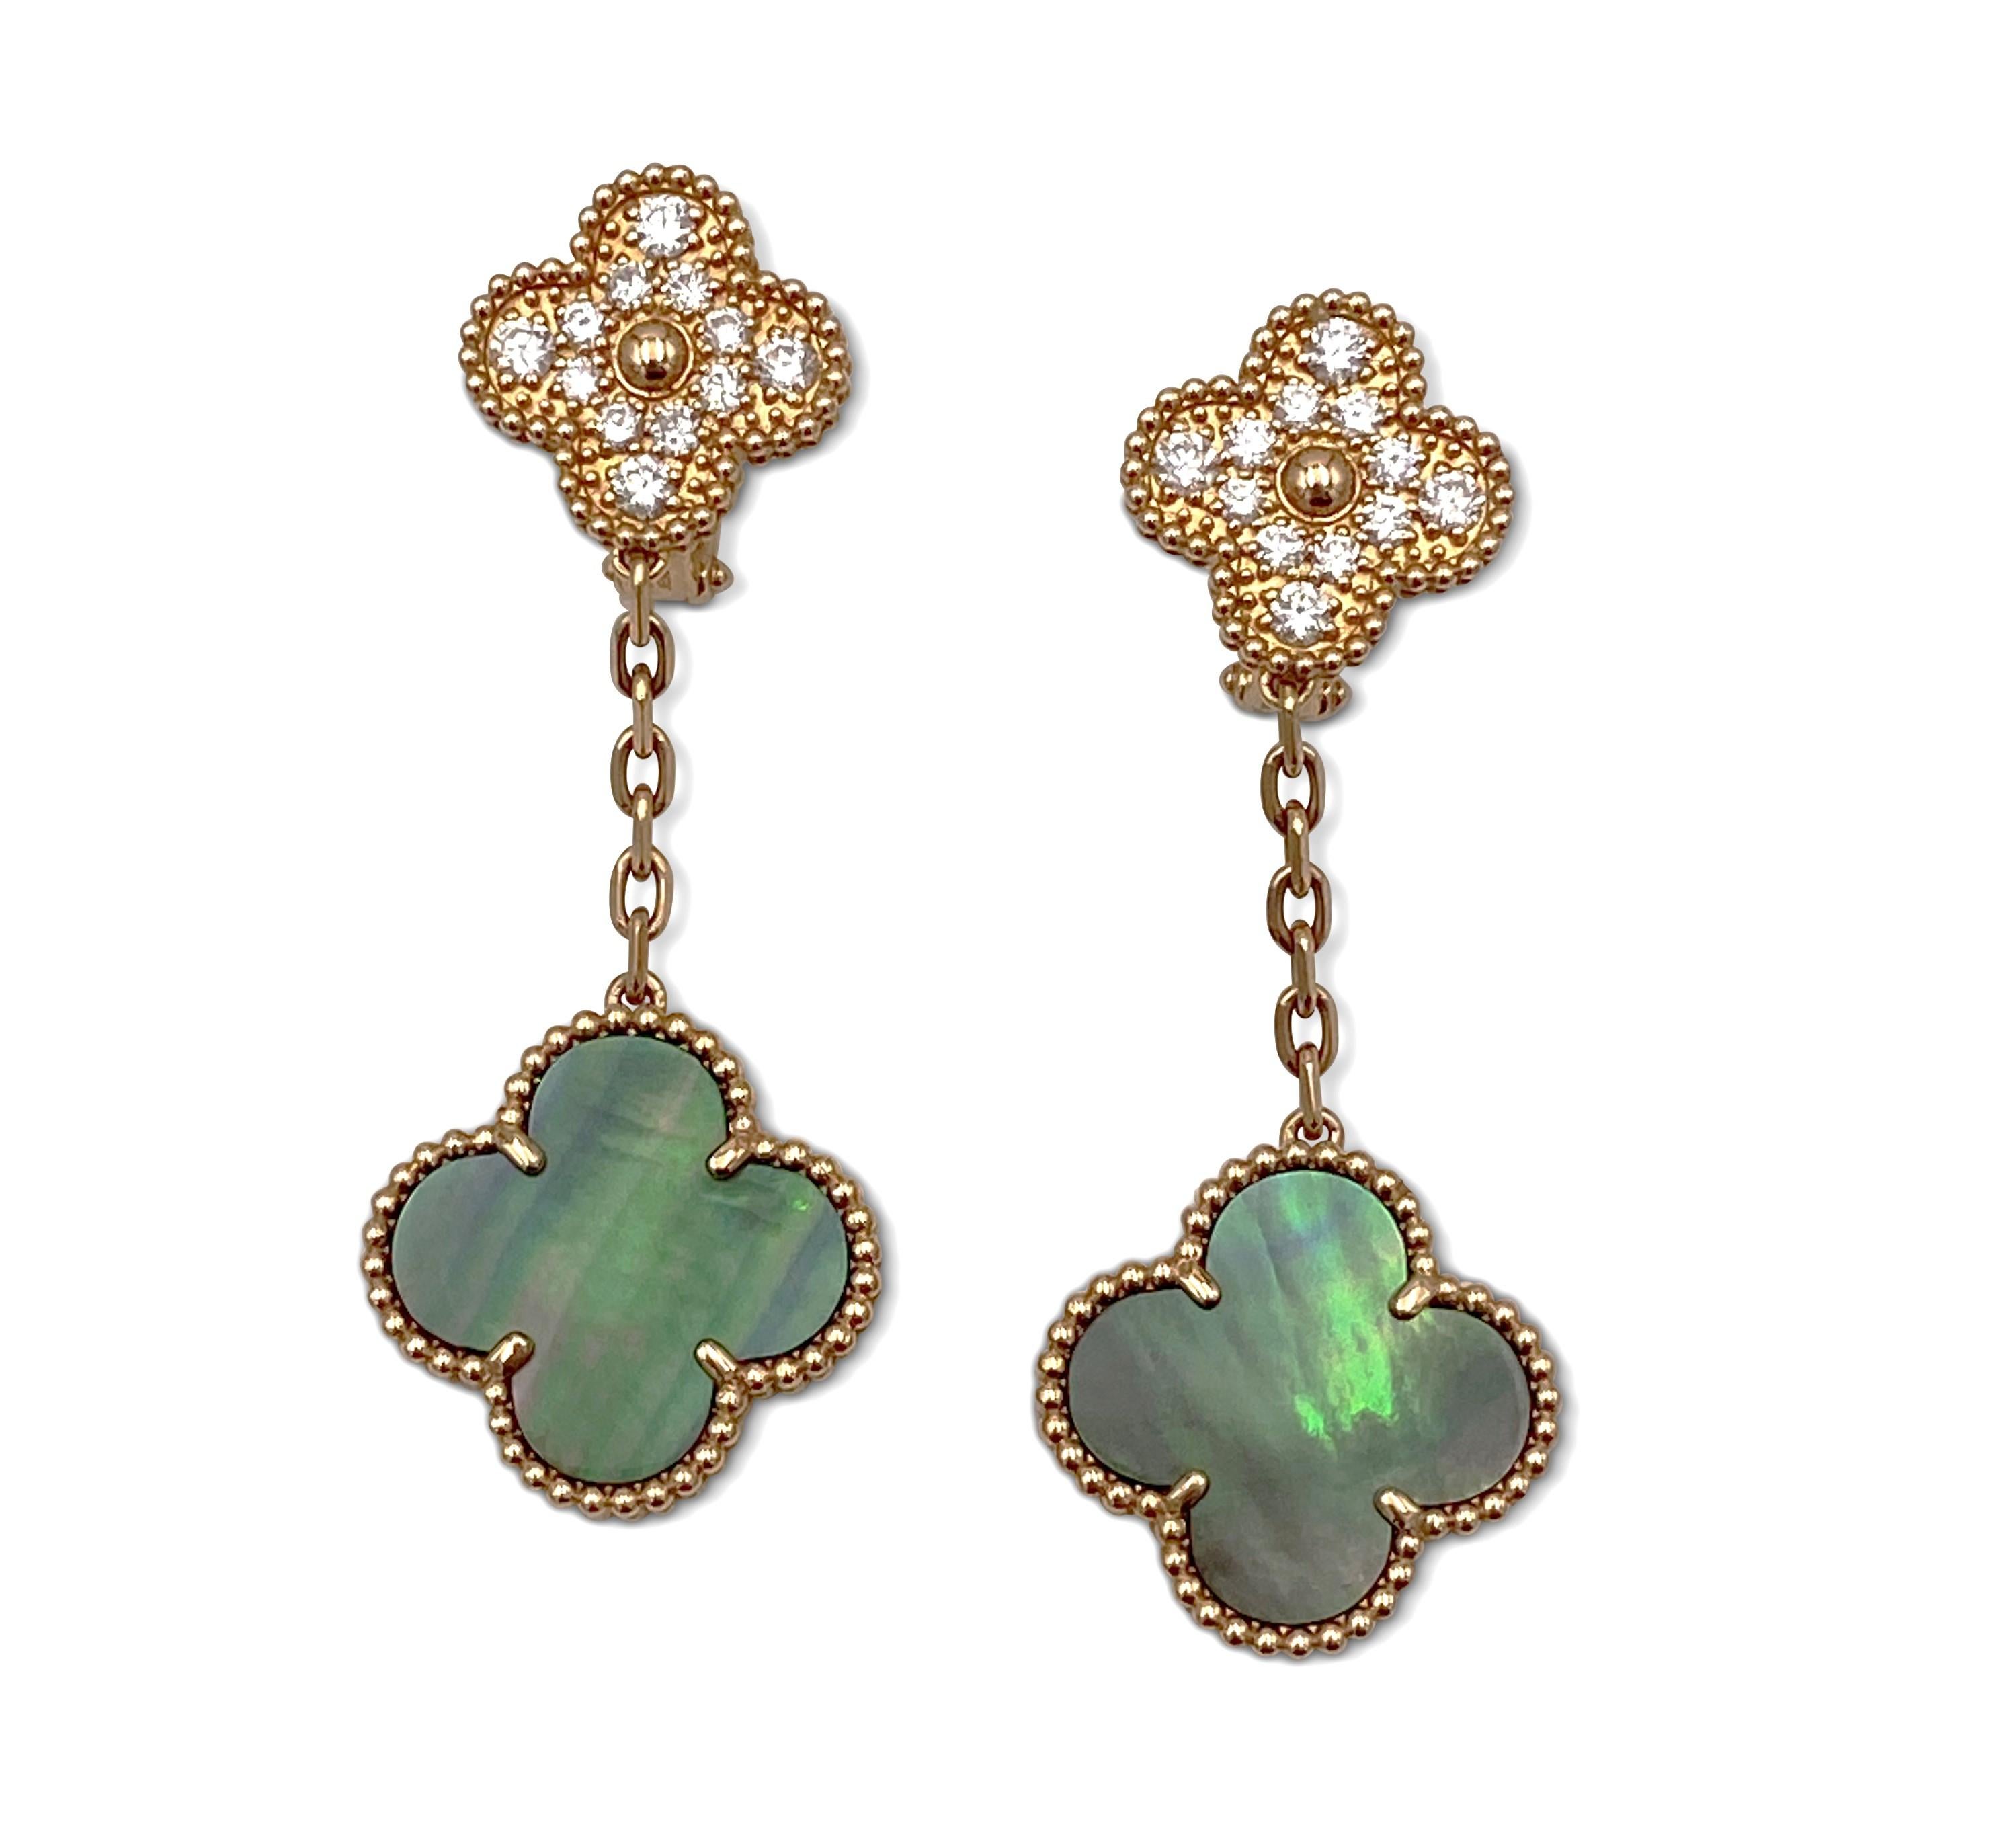 Authentic Van Cleef & Arpels 18 karat rose gold diamond and mother-of-pearl two motif Alhambra long earrings. Inspired by the clover leaf, the earrings asymmetric design feature different-sized Alhambra motifs made from different materials. The top